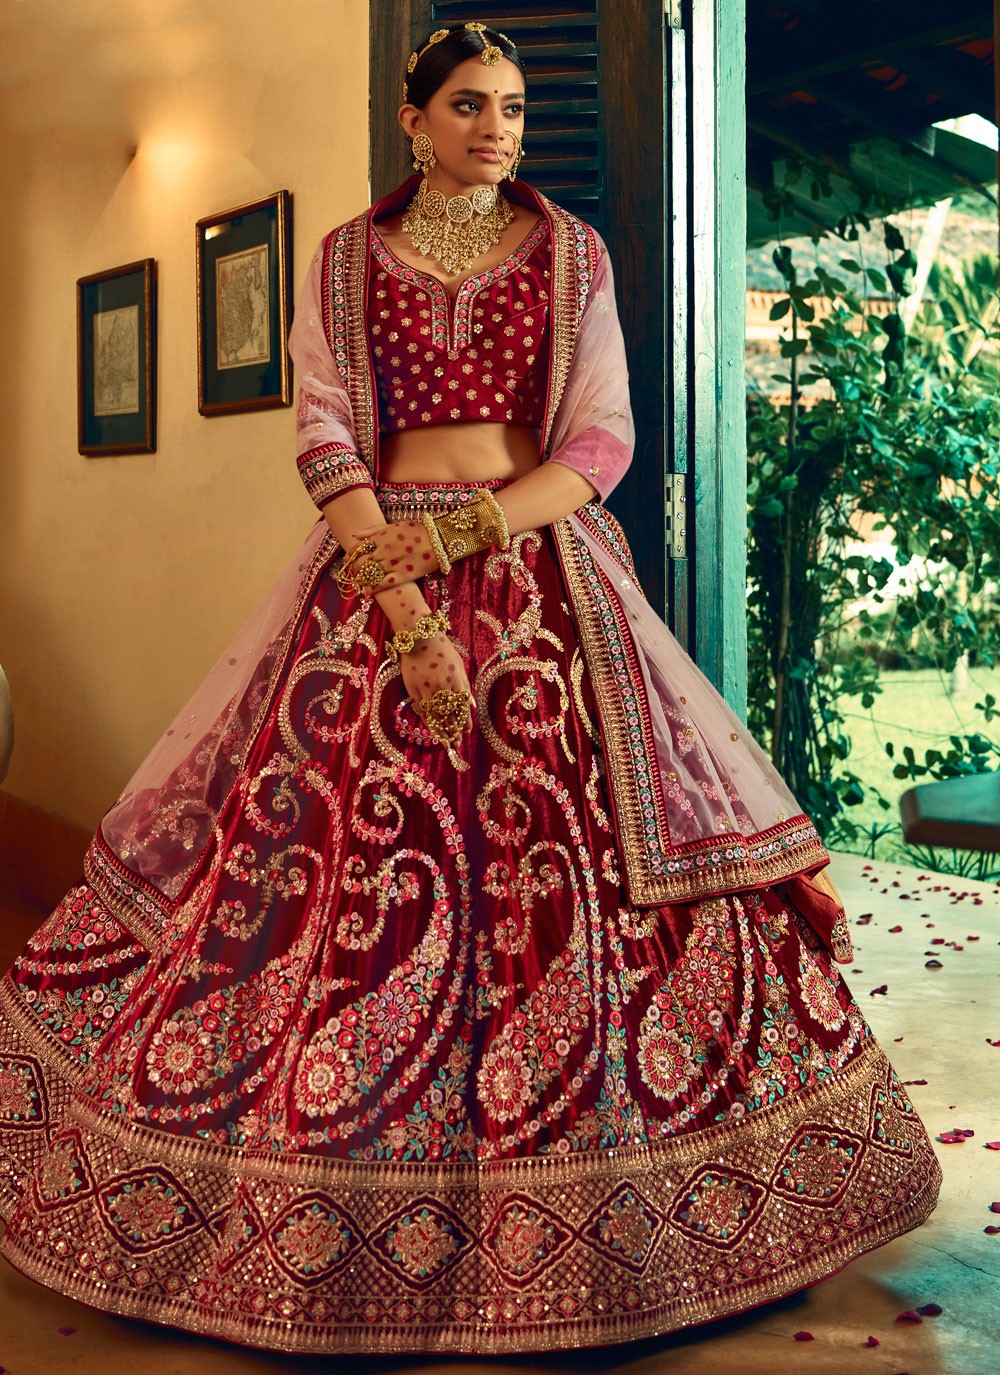 Things To Keep In Mind Before Using Can-Can To Make Your Bridal Outfit  Fluffy